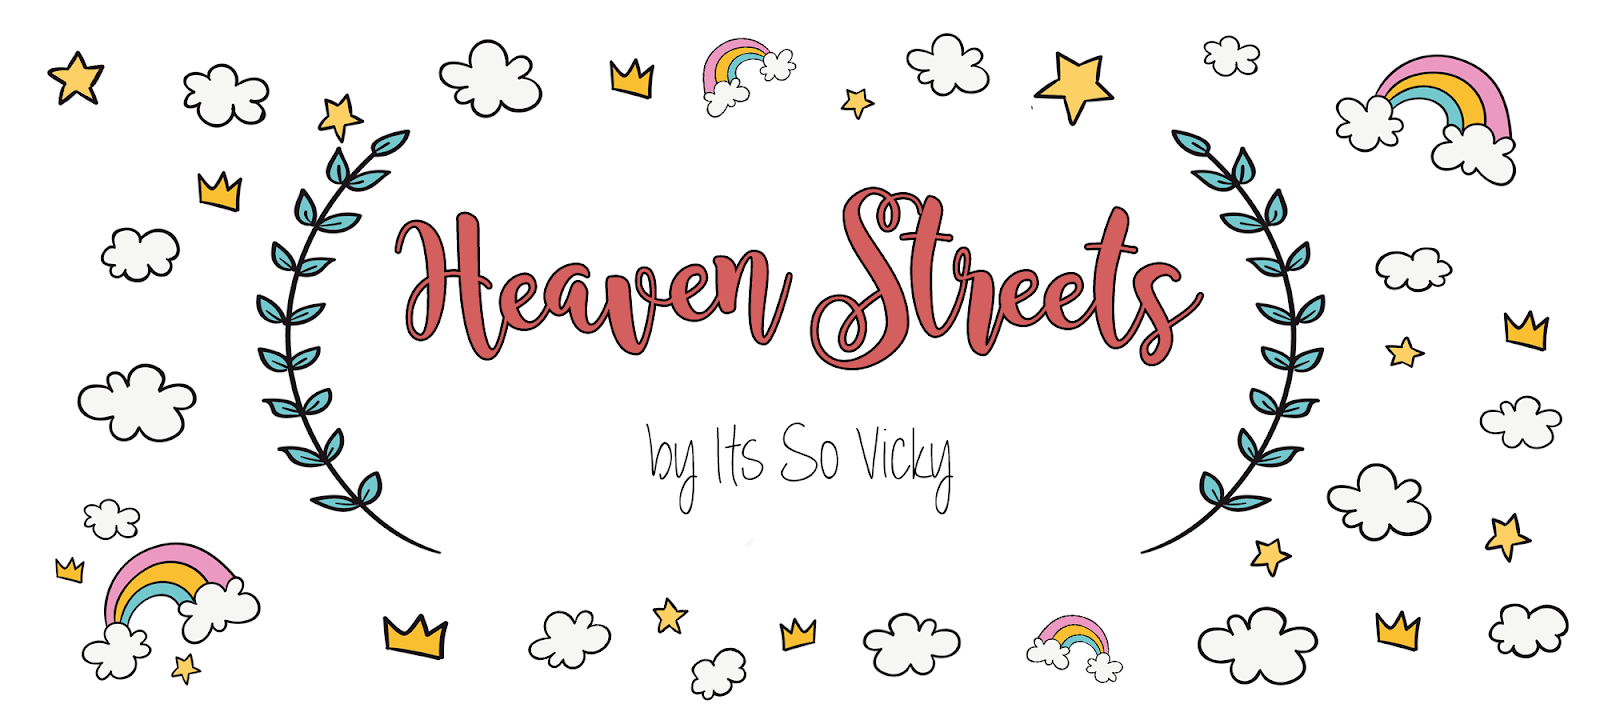 HEAVEN STREETS by It's So Vicky